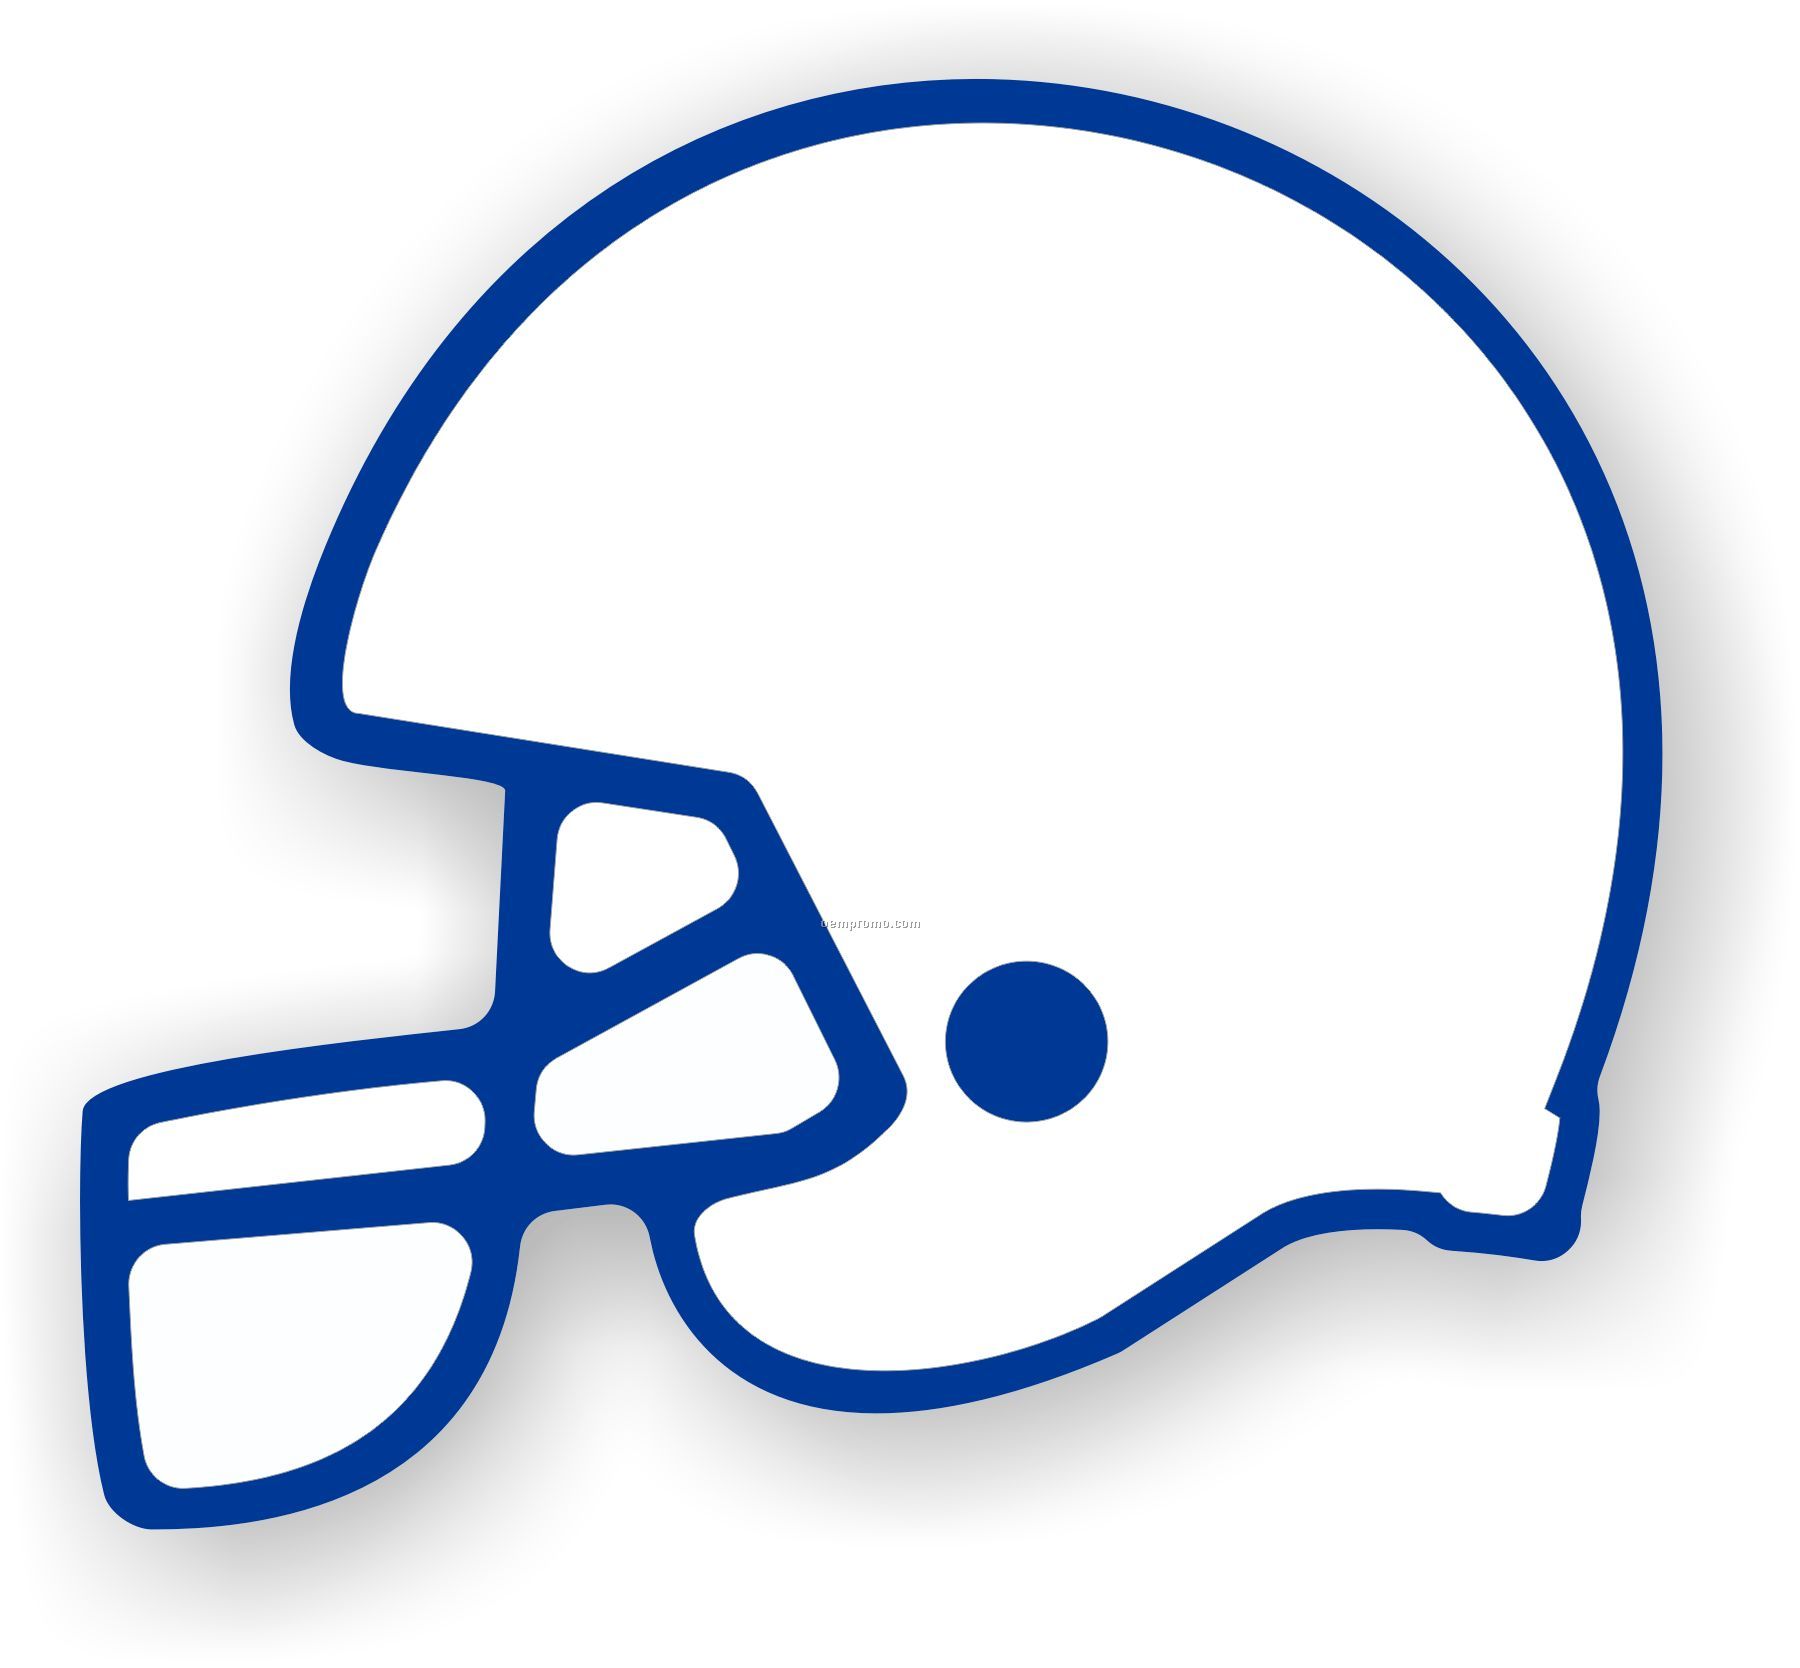 Orange Football Helmet Clipart | Clipart library - Free Clipart Images